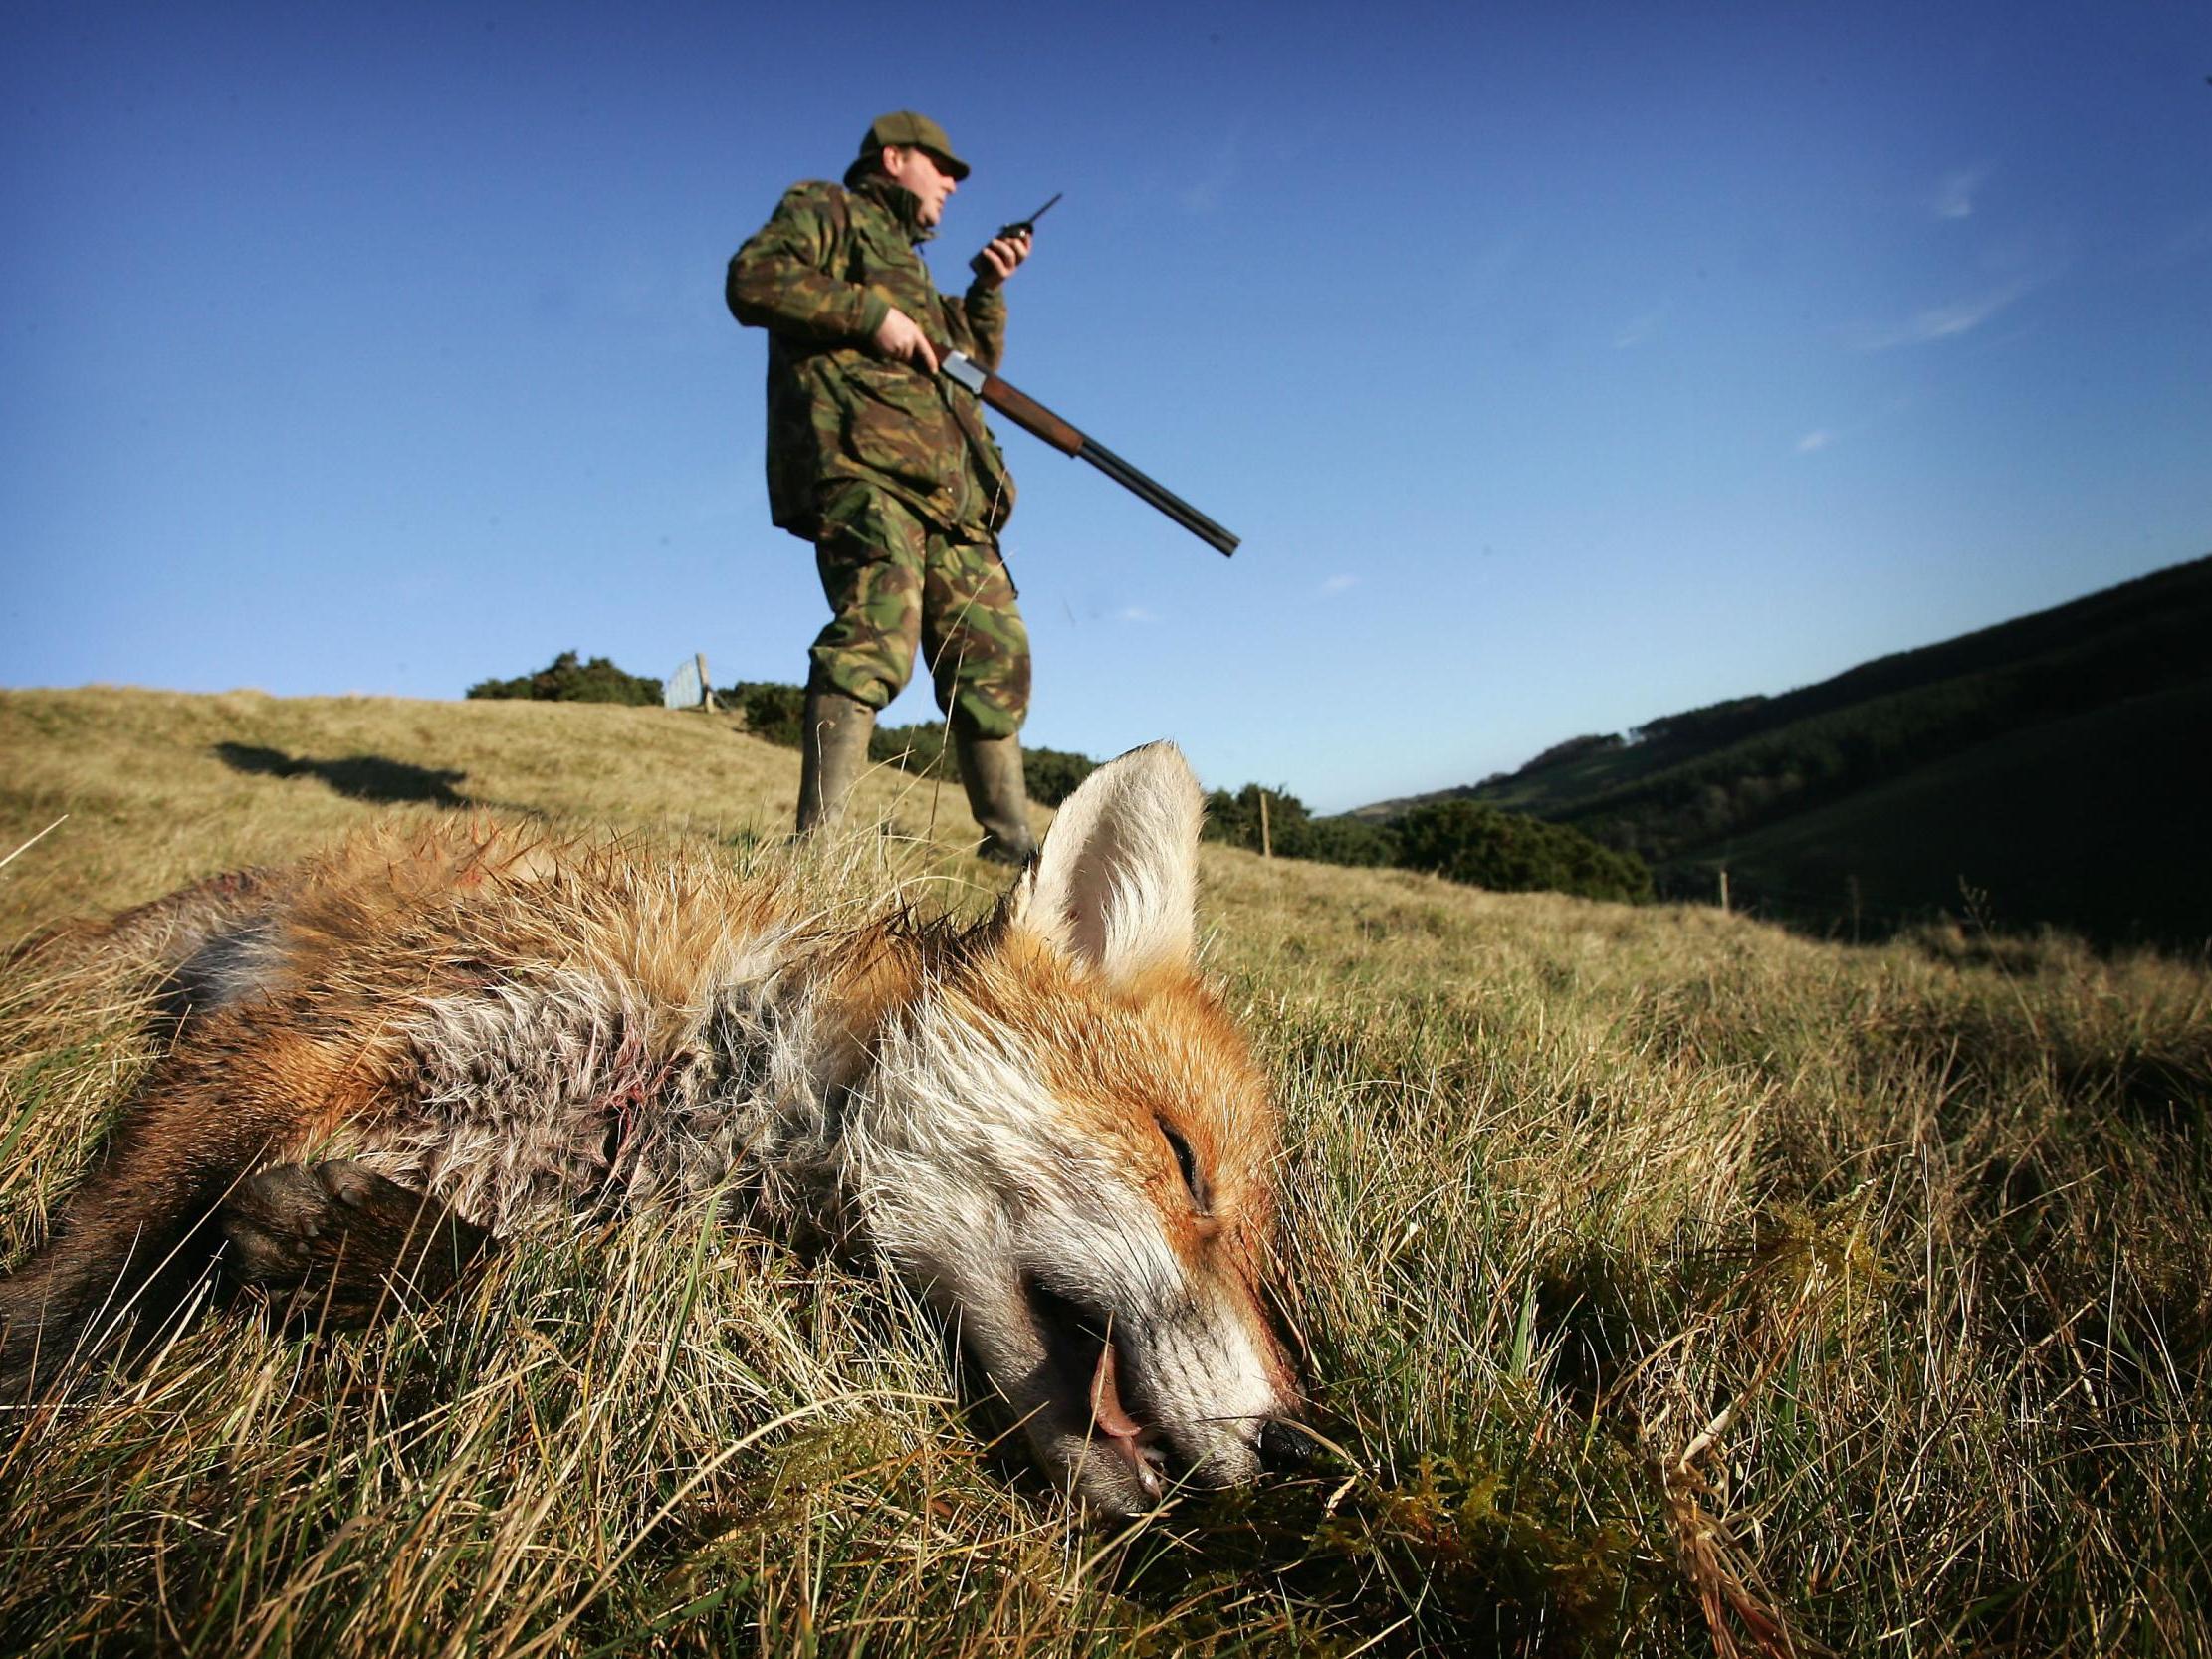 A fox is legally shot in Scotland after being 'flushed out' by hounds; the new bill would allow only two dogs to be used